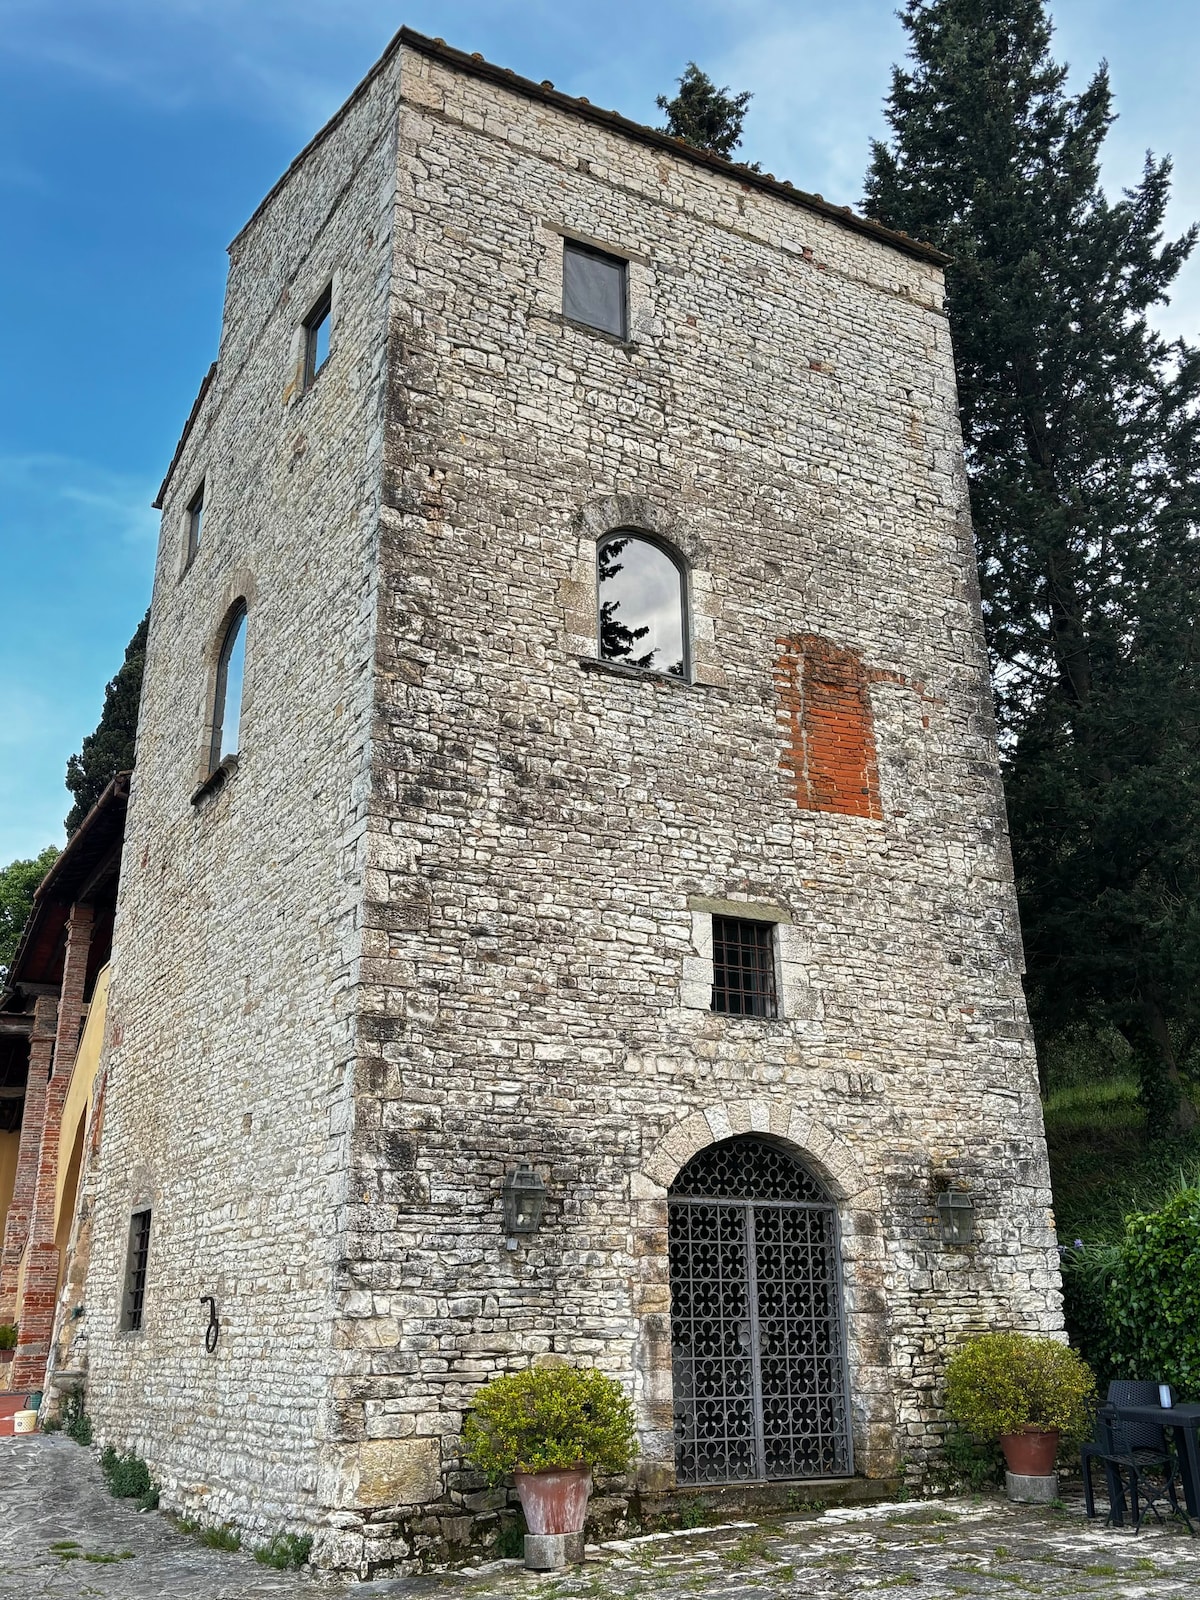 Tuscan Medieval Tower